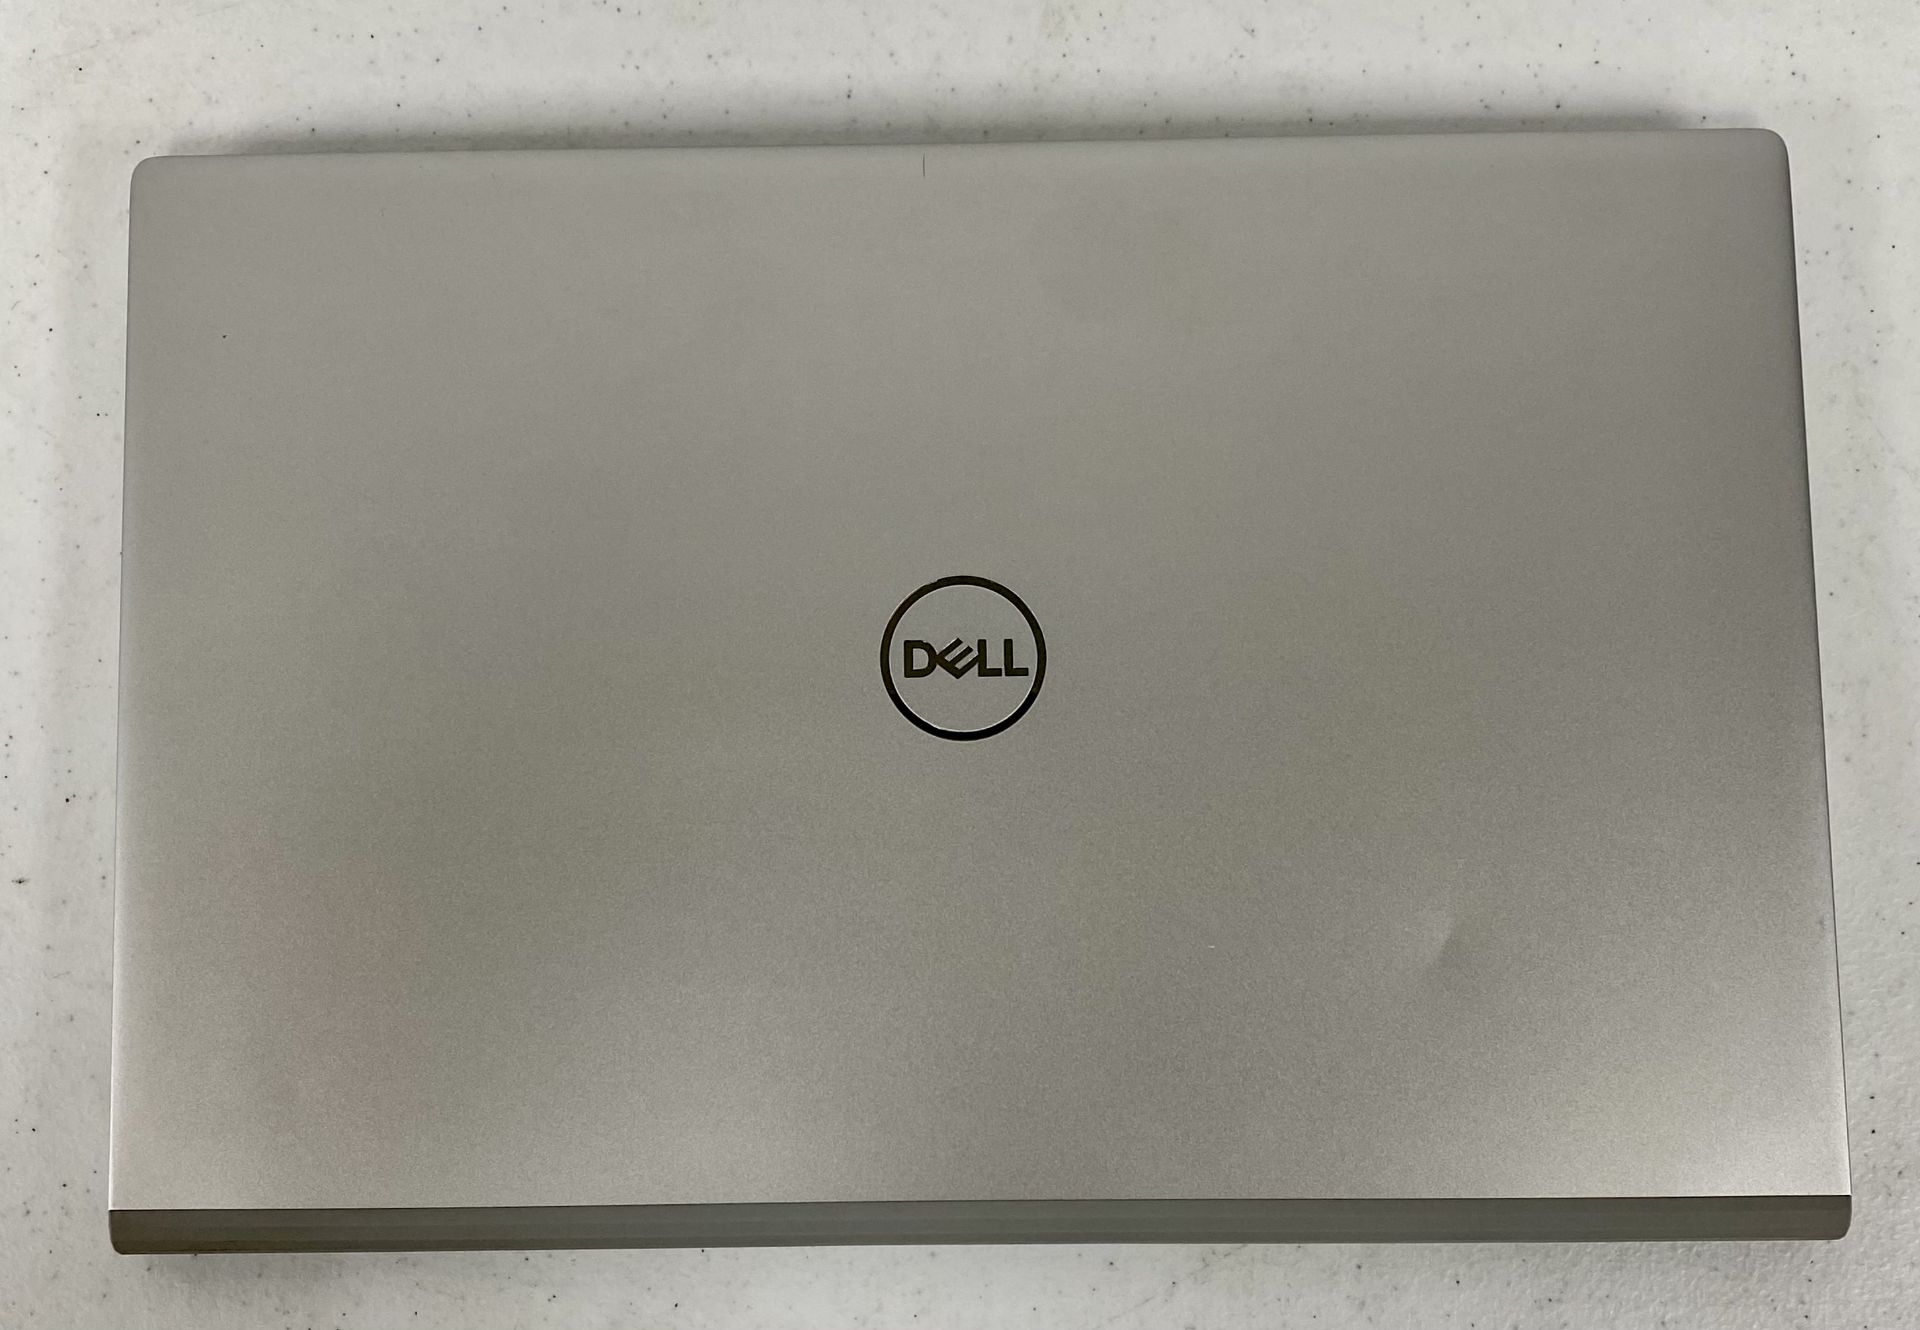 A pre-owned Dell Inspiron 15 5000 Laptop in Silver with Intel Core i5-1135G7 2.40GHz CPU, 8GB RAM, 2